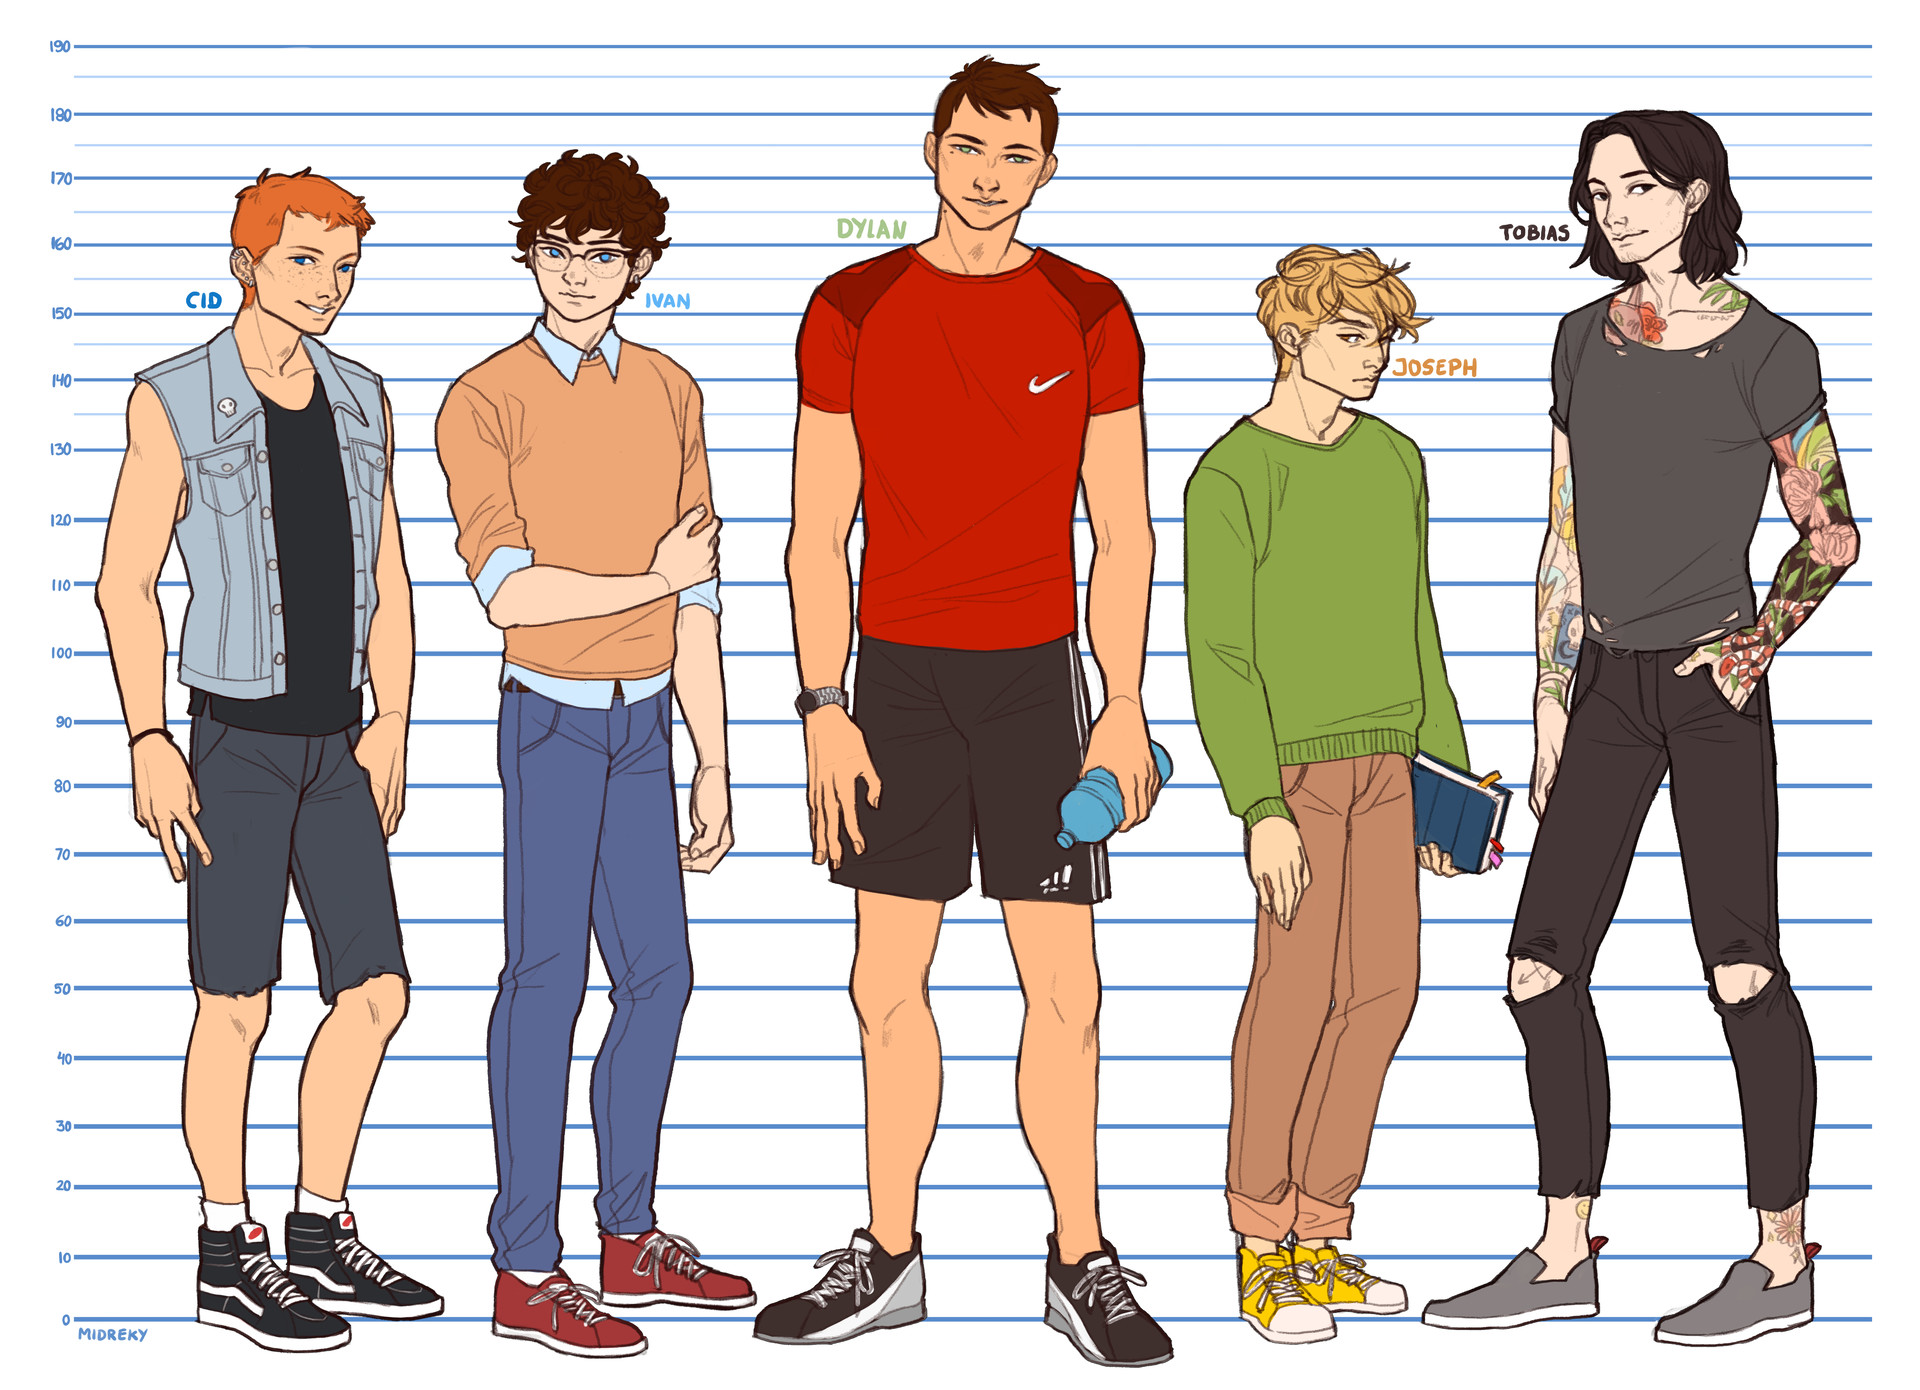 Character Height Chart in Feet - CLIP STUDIO ASSETS